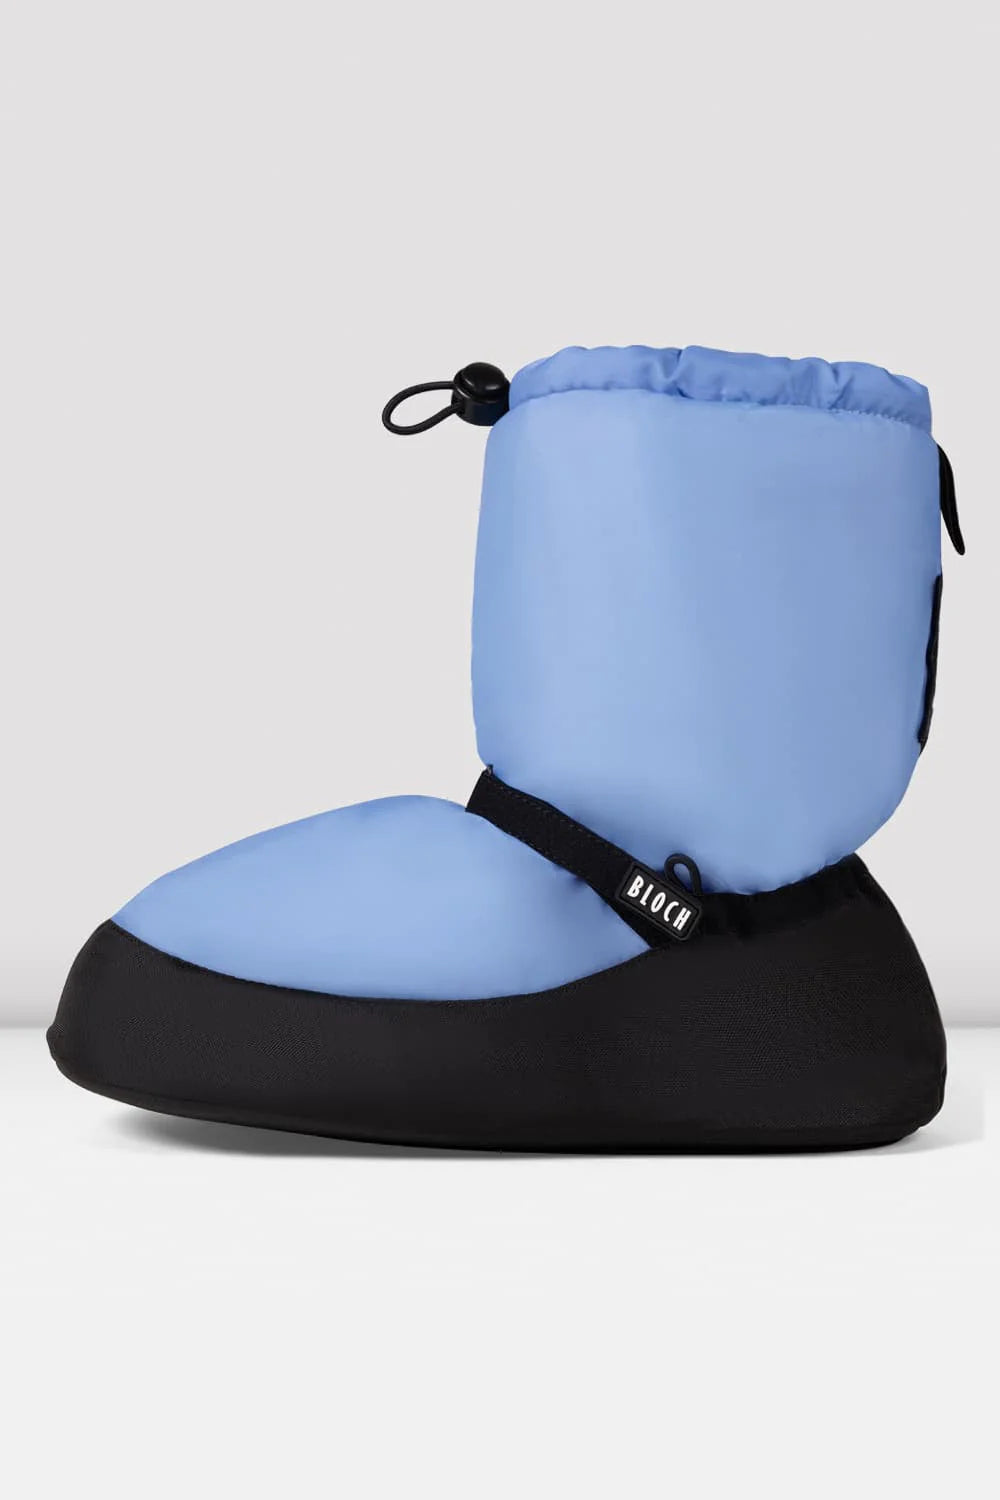 Bloch warm up bootie for dancers in pastel blue sold by The Collective Dancewear